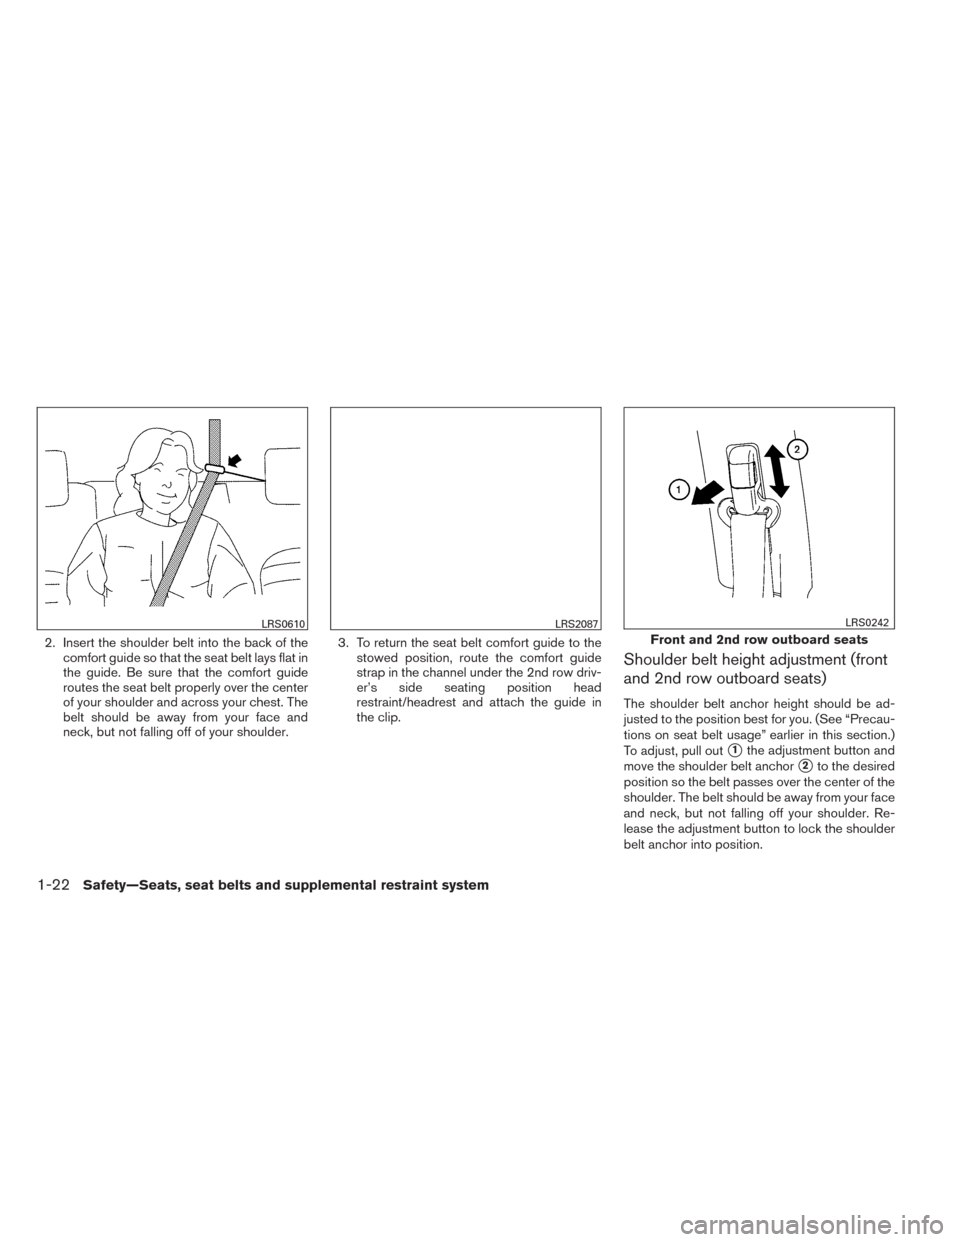 NISSAN XTERRA 2014 N50 / 2.G Service Manual 2. Insert the shoulder belt into the back of thecomfort guide so that the seat belt lays flat in
the guide. Be sure that the comfort guide
routes the seat belt properly over the center
of your shoulde